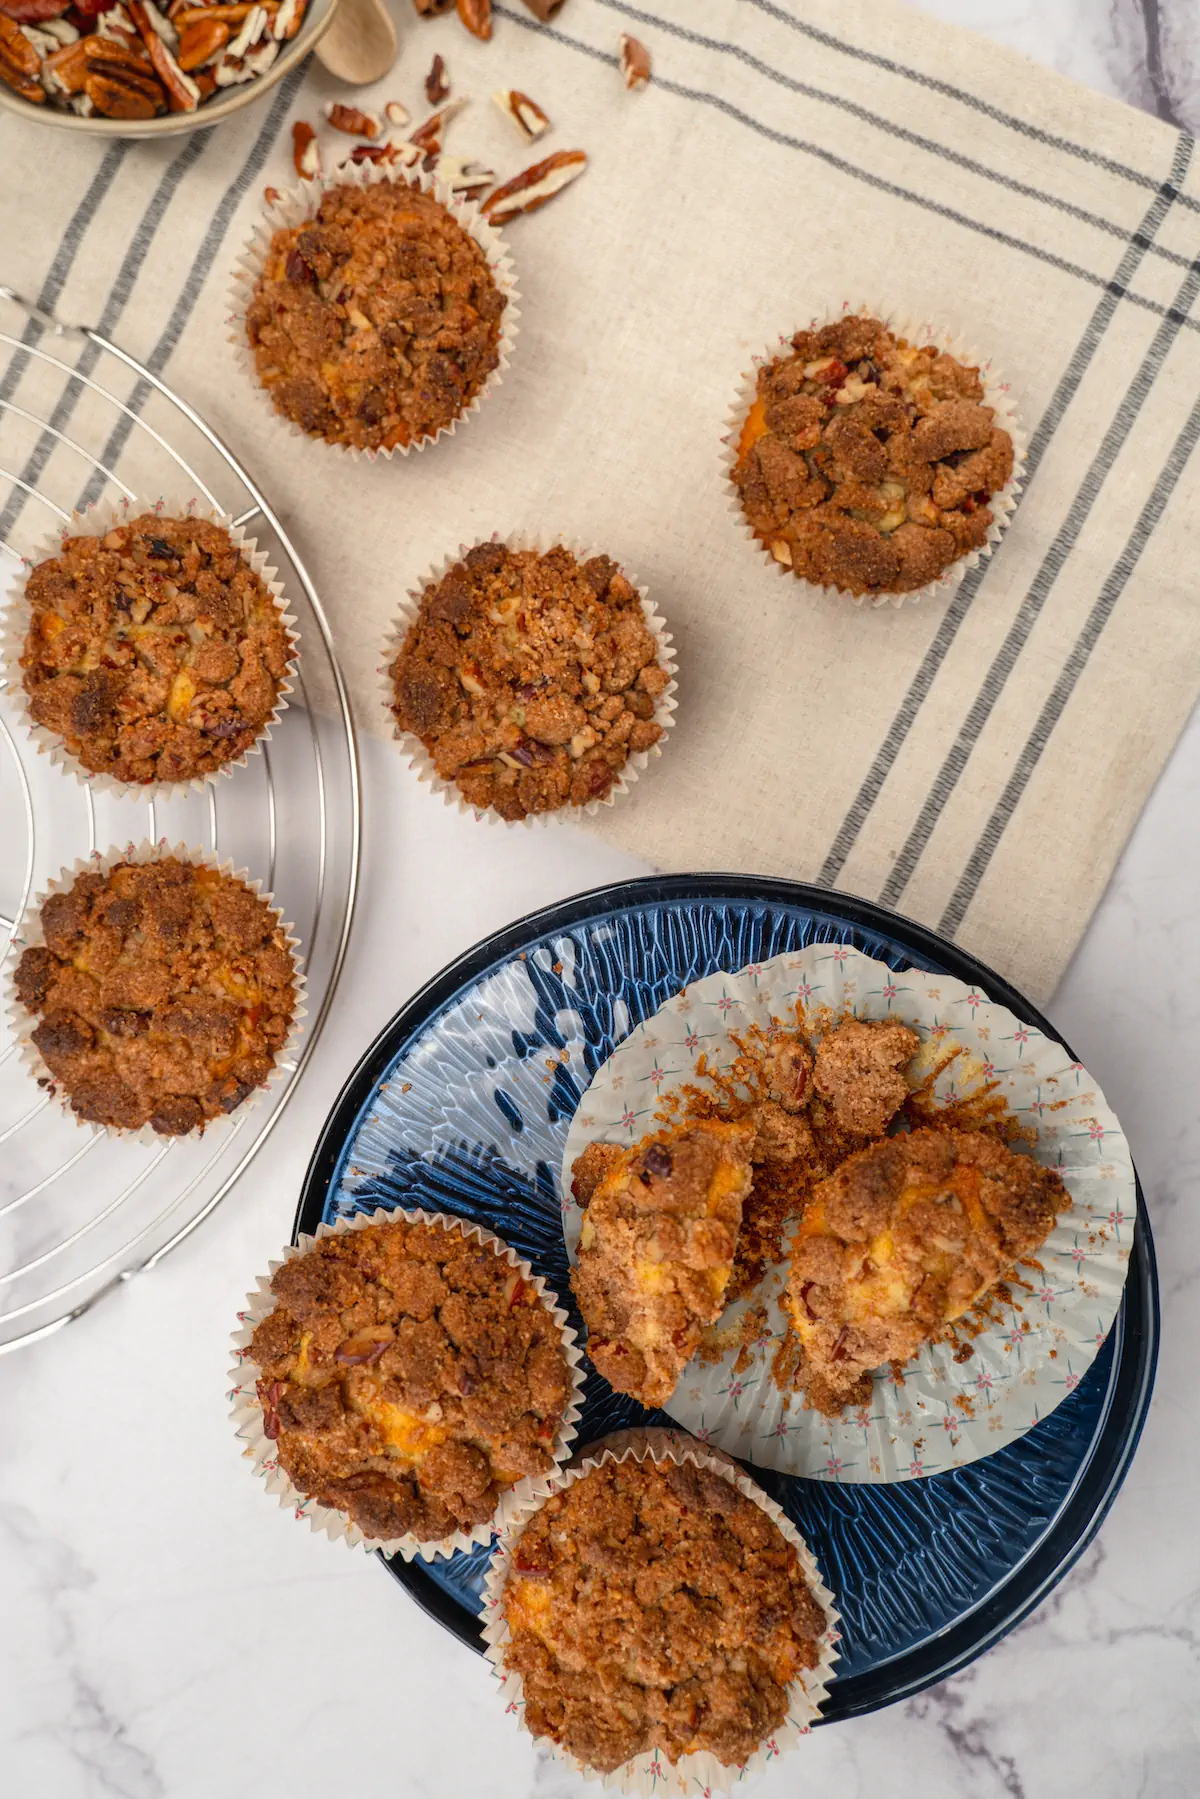 A top shot of homemade keto almond flour muffins and some presented on a blue round plate.